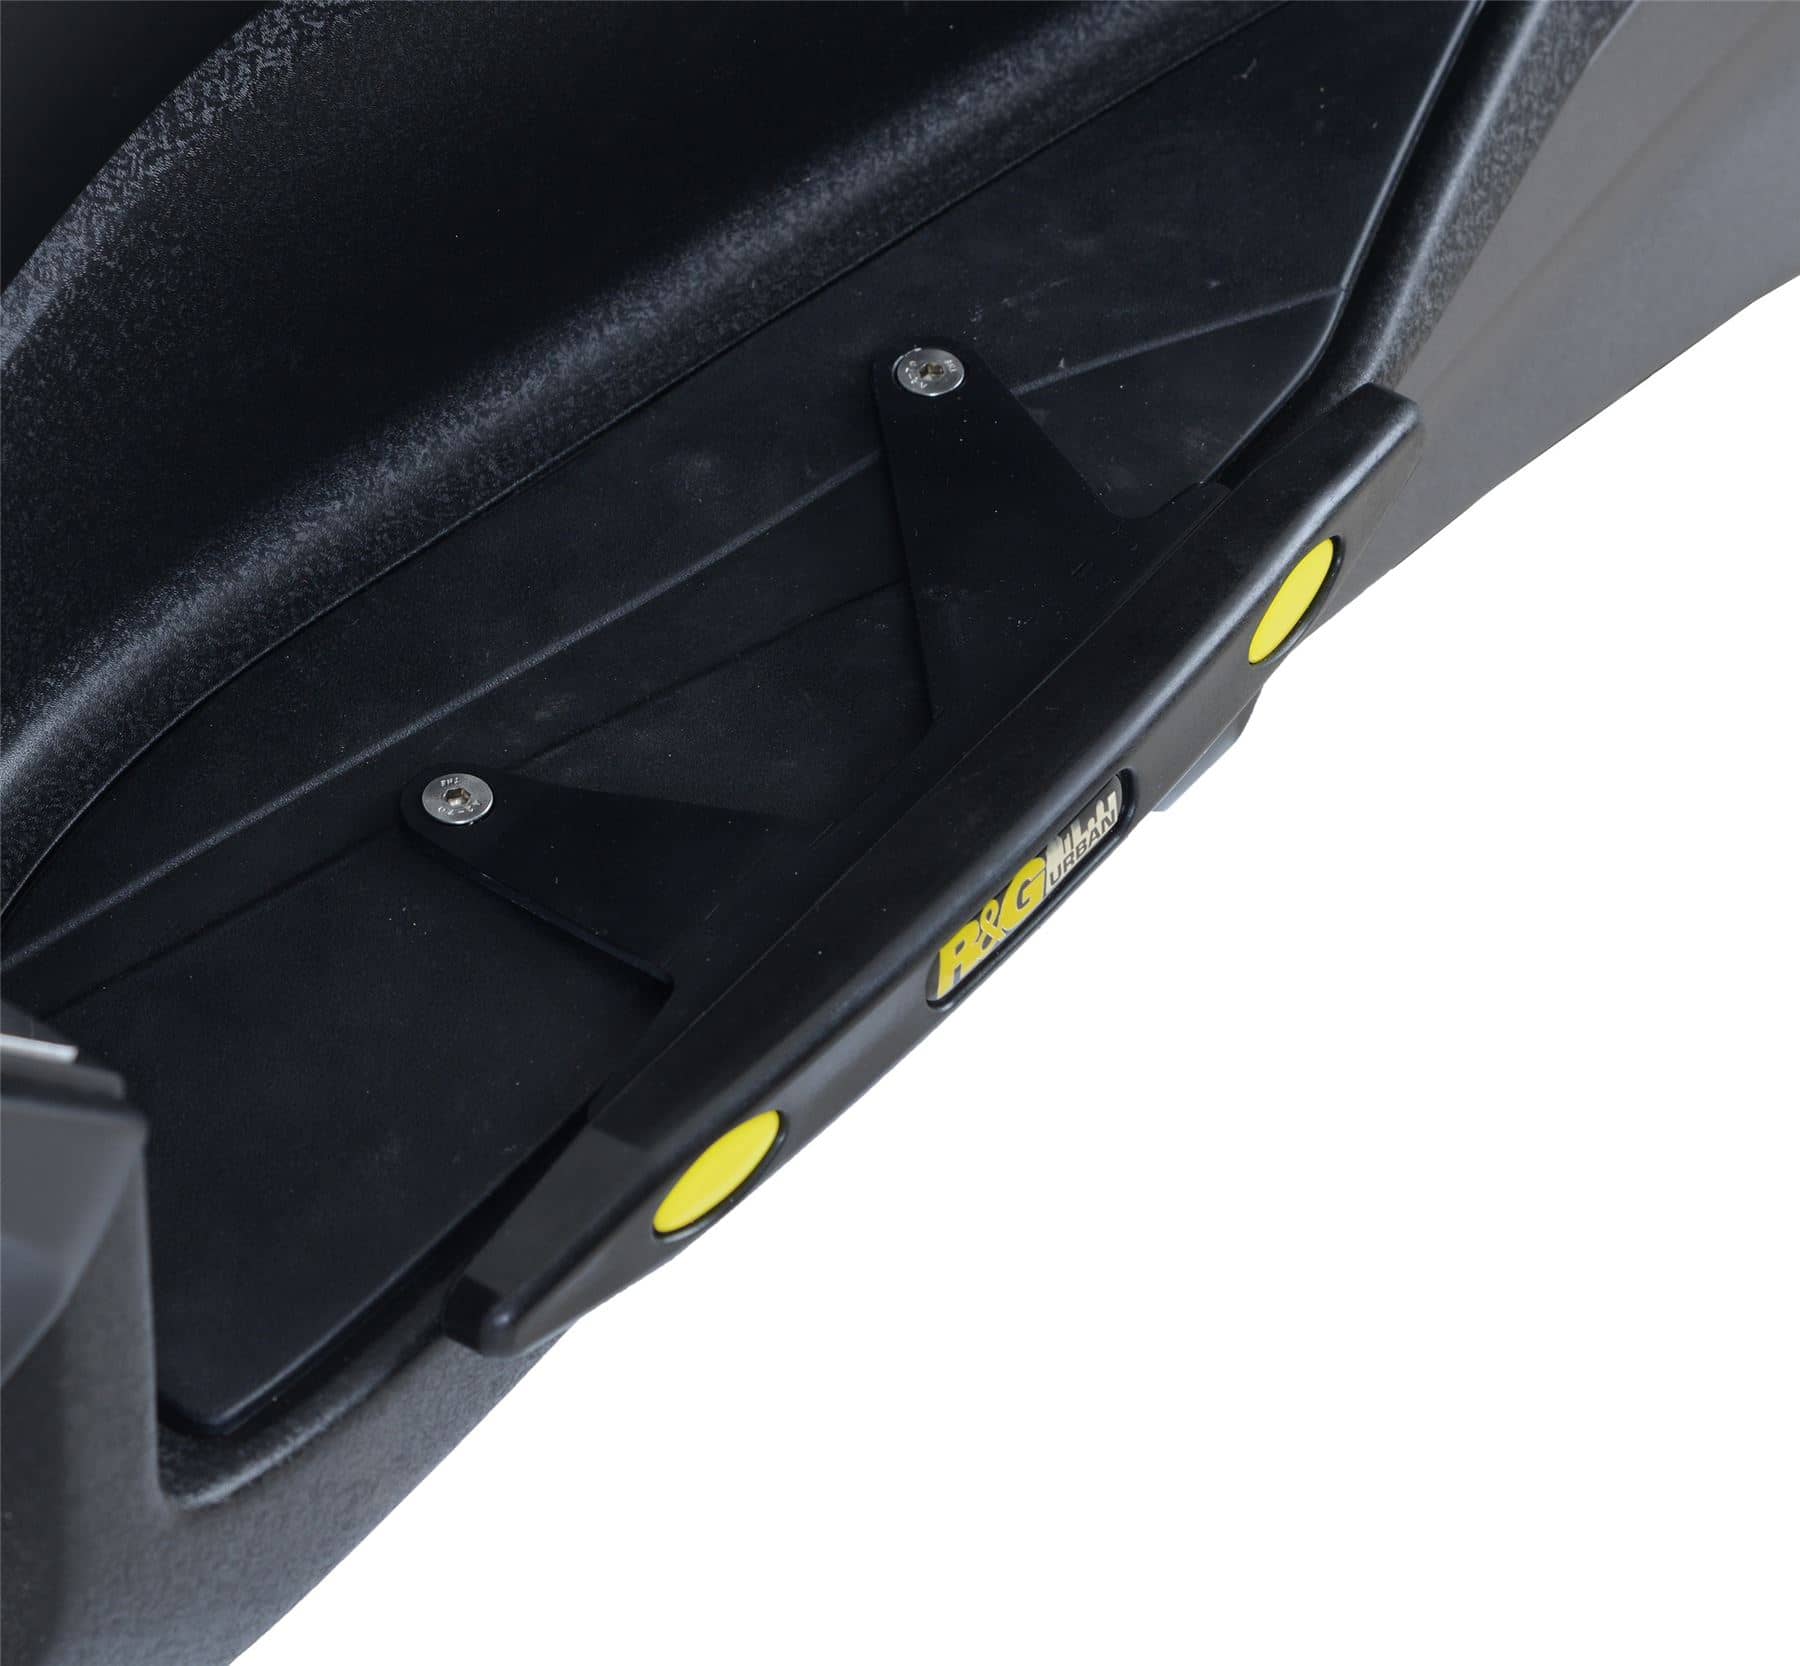 R&G Footboard Sliders for Yamaha X-Max 300 2017 to 2020